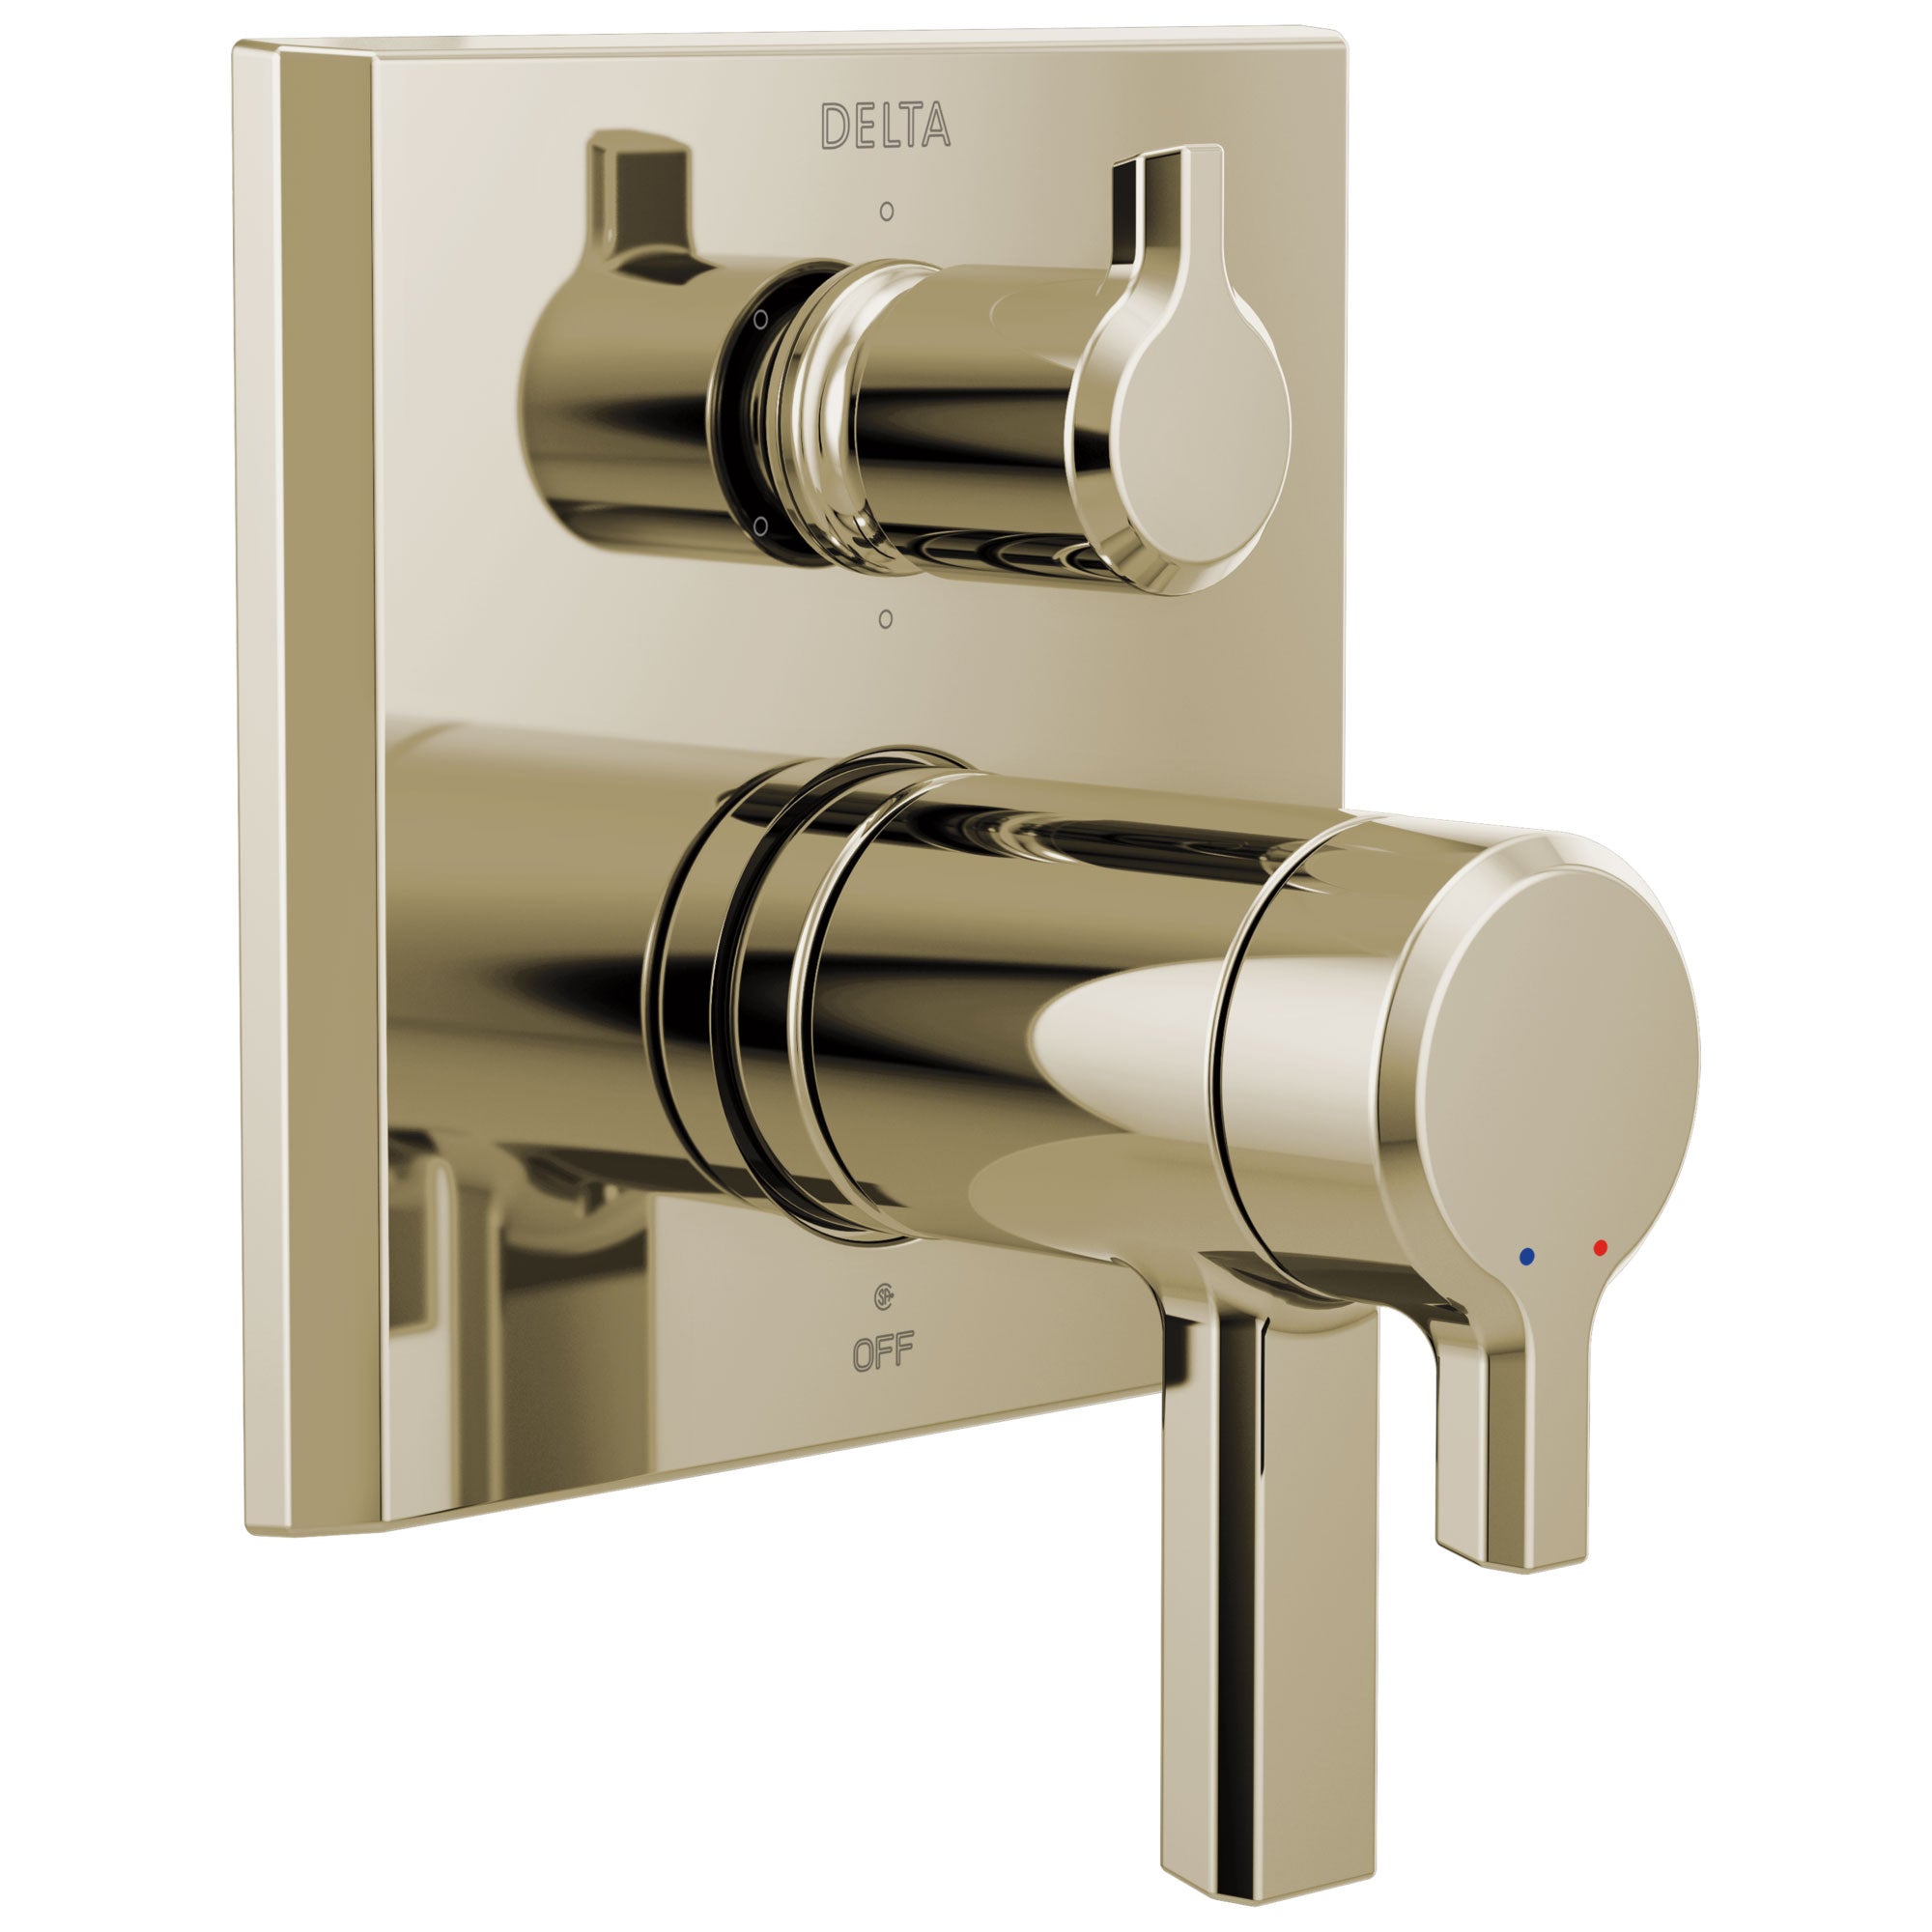 Delta Pivotal Polished Nickel Finish Thermostatic 17T Shower System Control with 6-Setting Integrated Diverter Includes Rough Valve and Handles D3068V